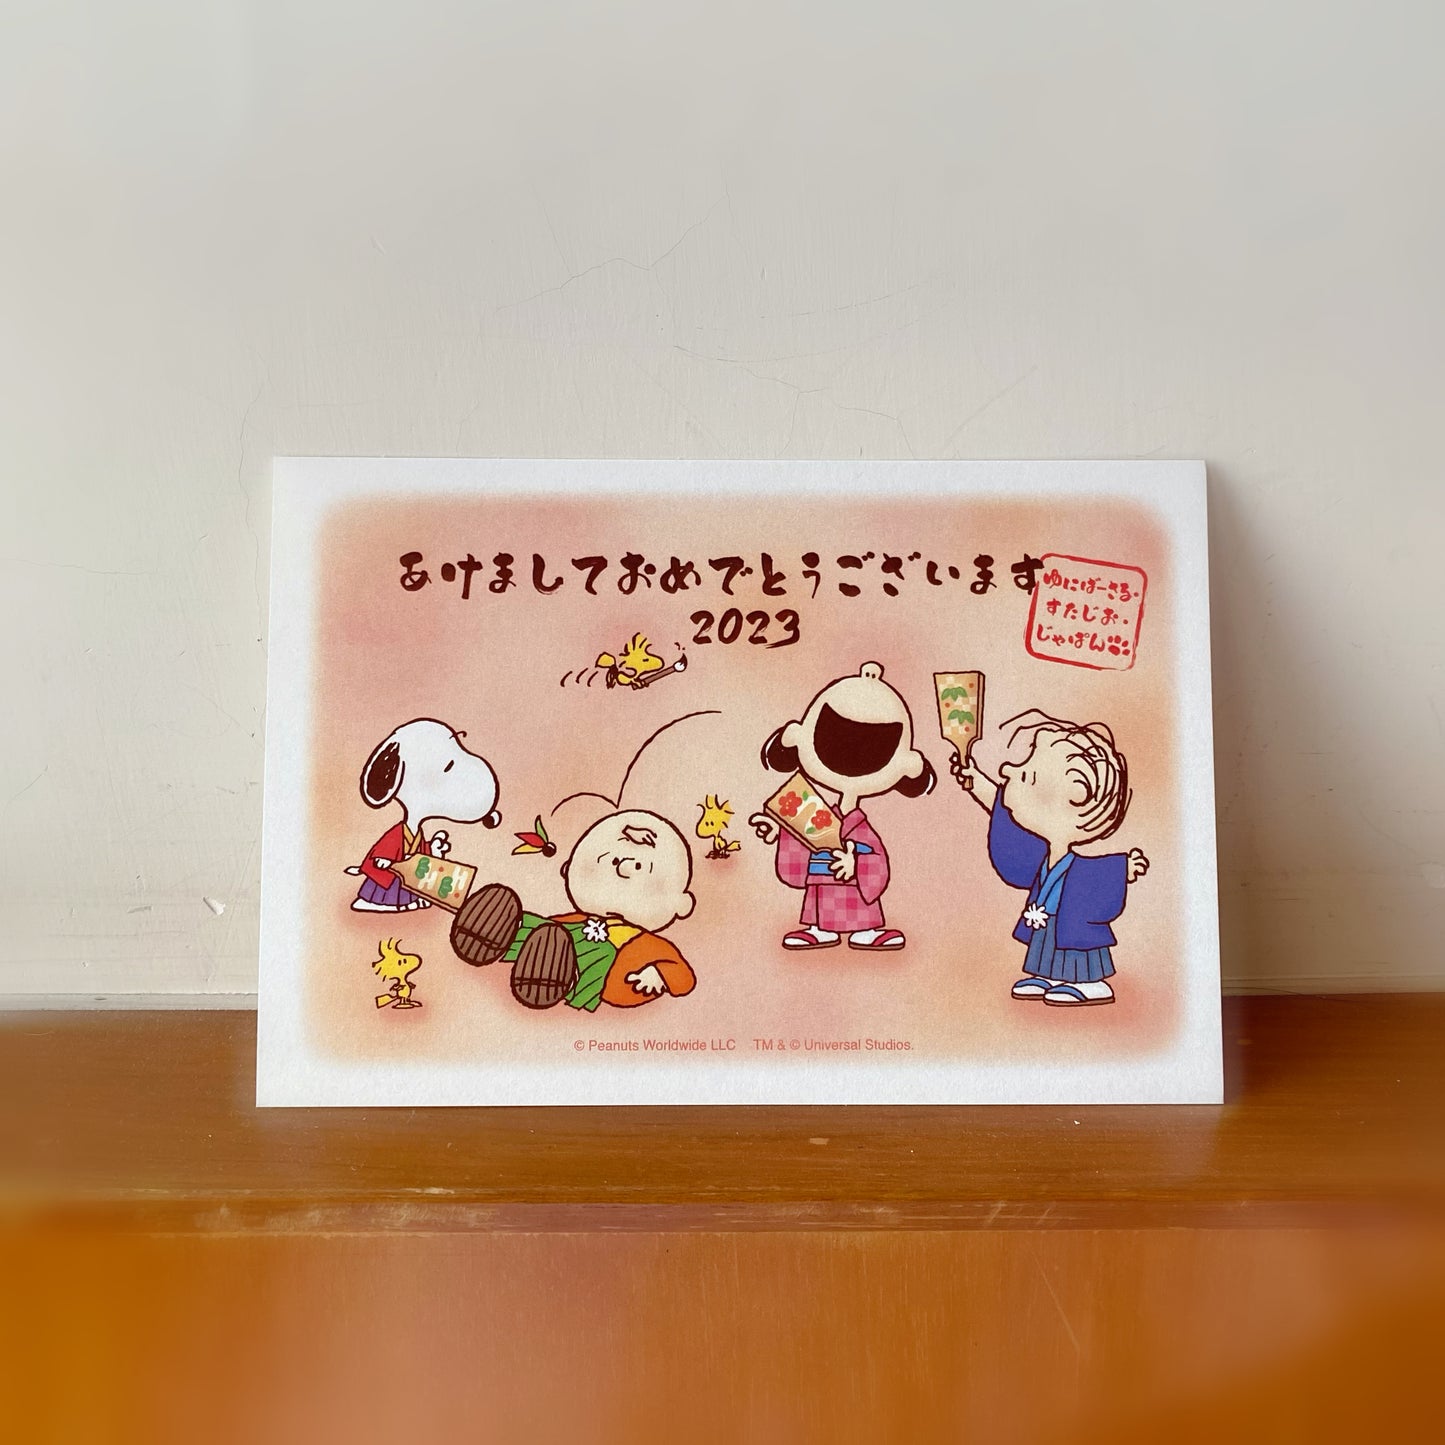 【In stock】USJ New Year's greeting card New Year's postcard